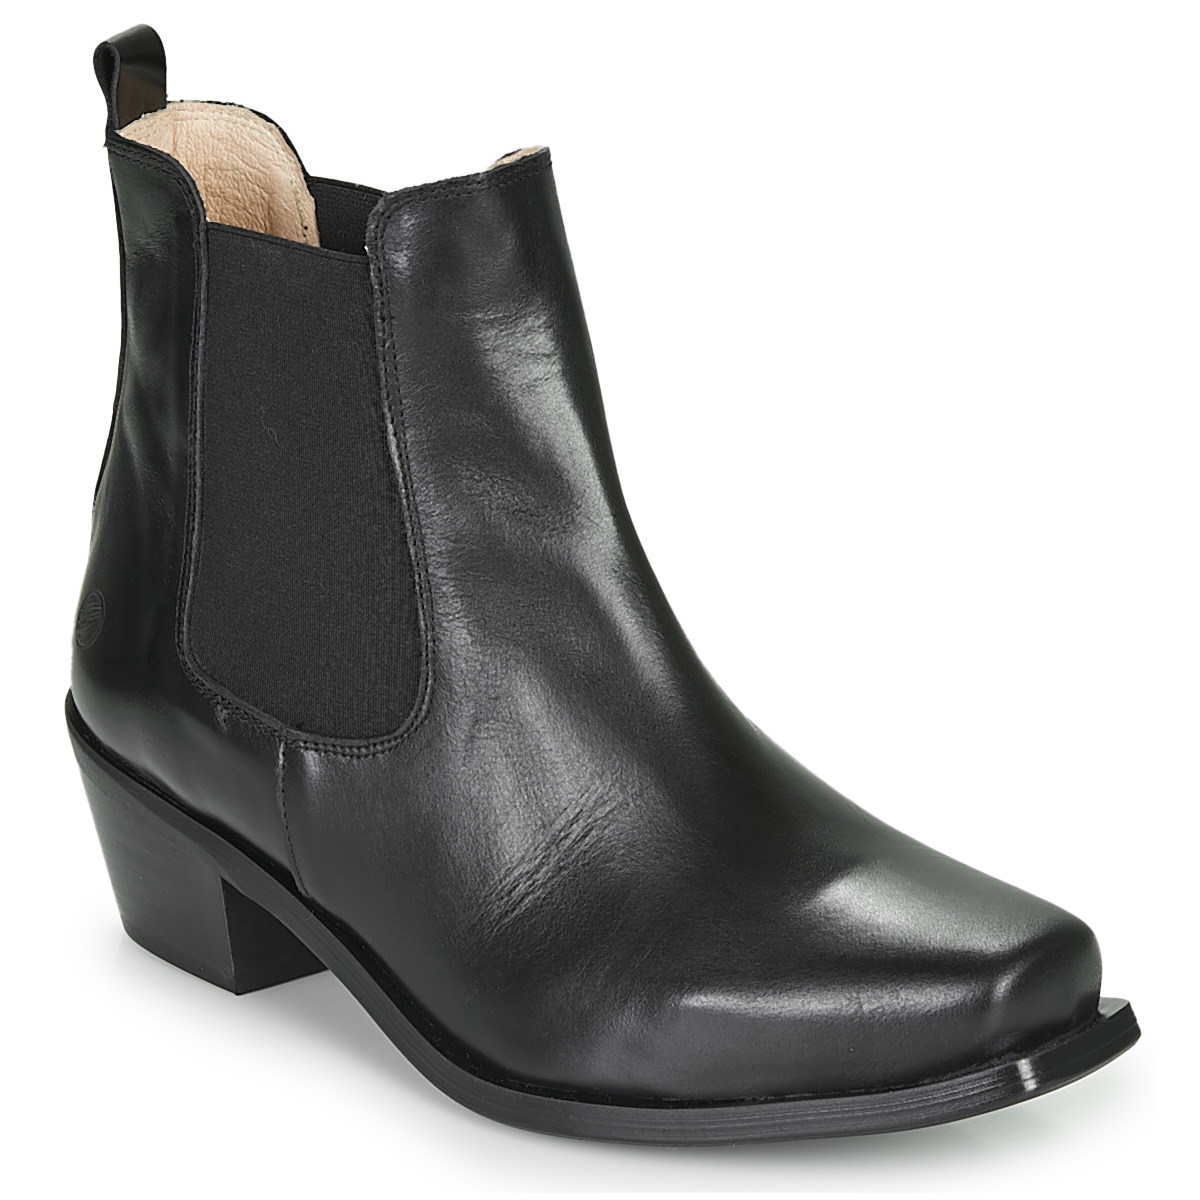 Betty London - Ankle Boots in Black for Woman by Spartoo GOOFASH